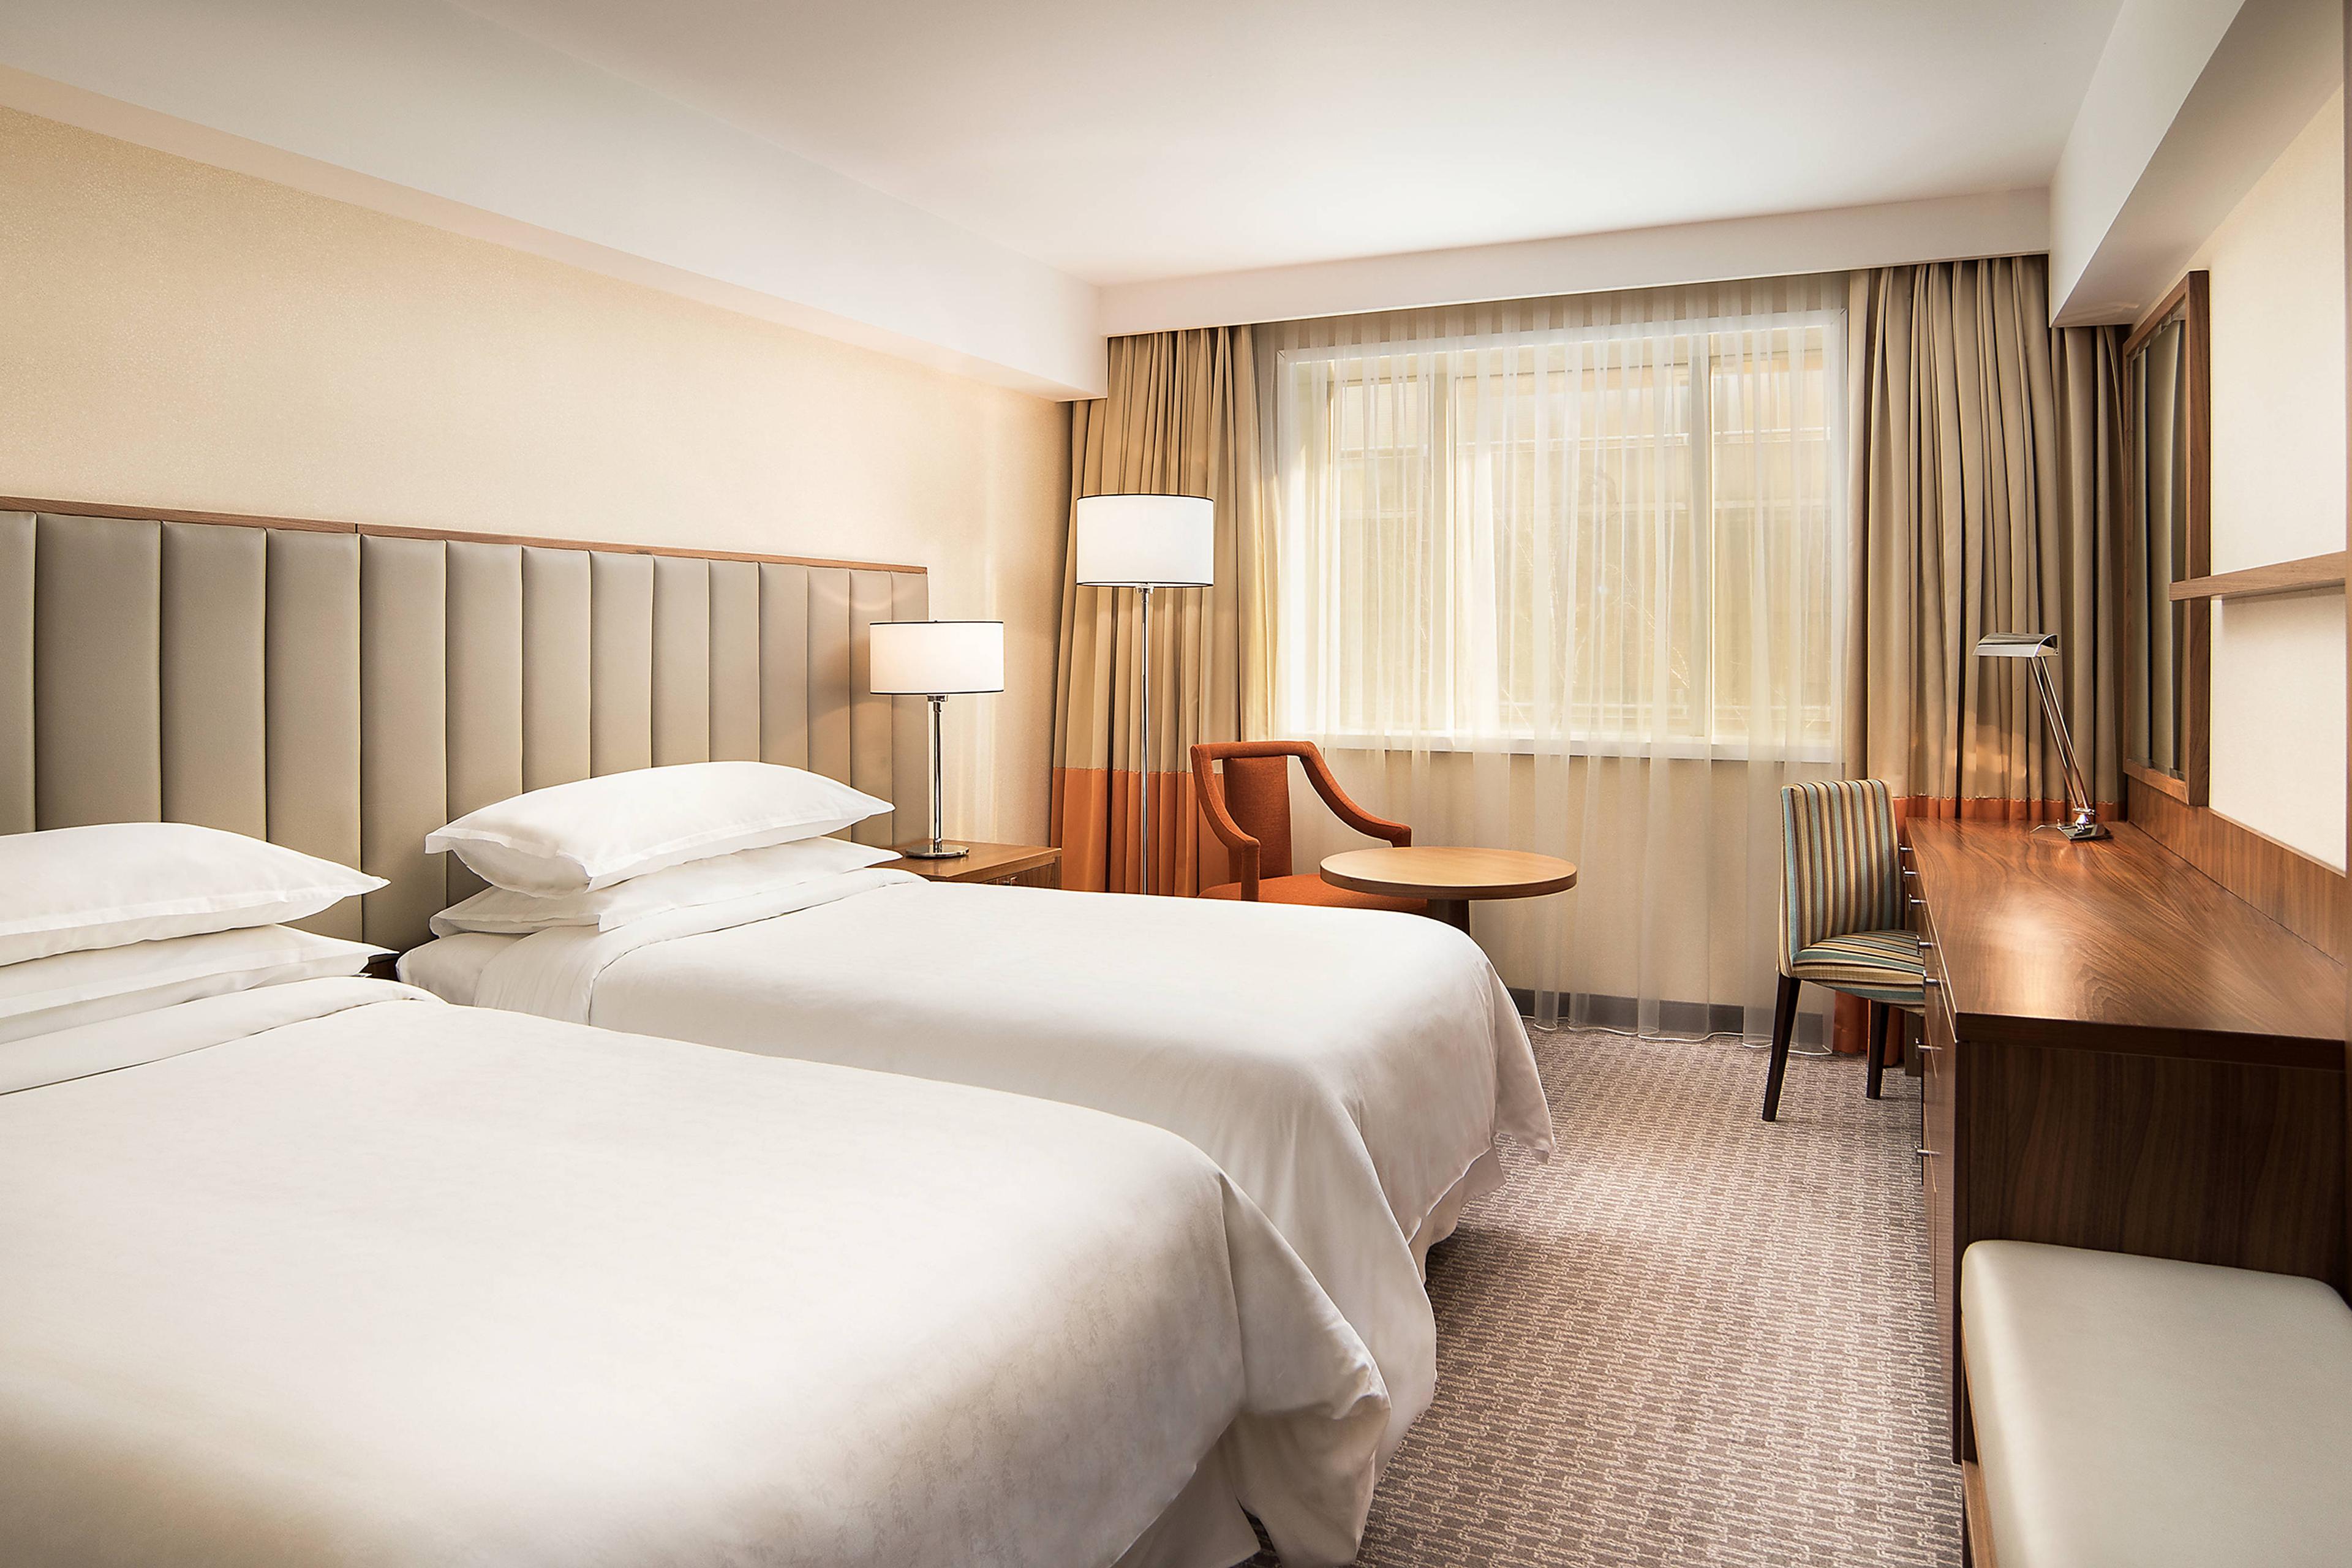 Enjoy the spacious accommodations in our Deluxe rooms, featuring twin beds.